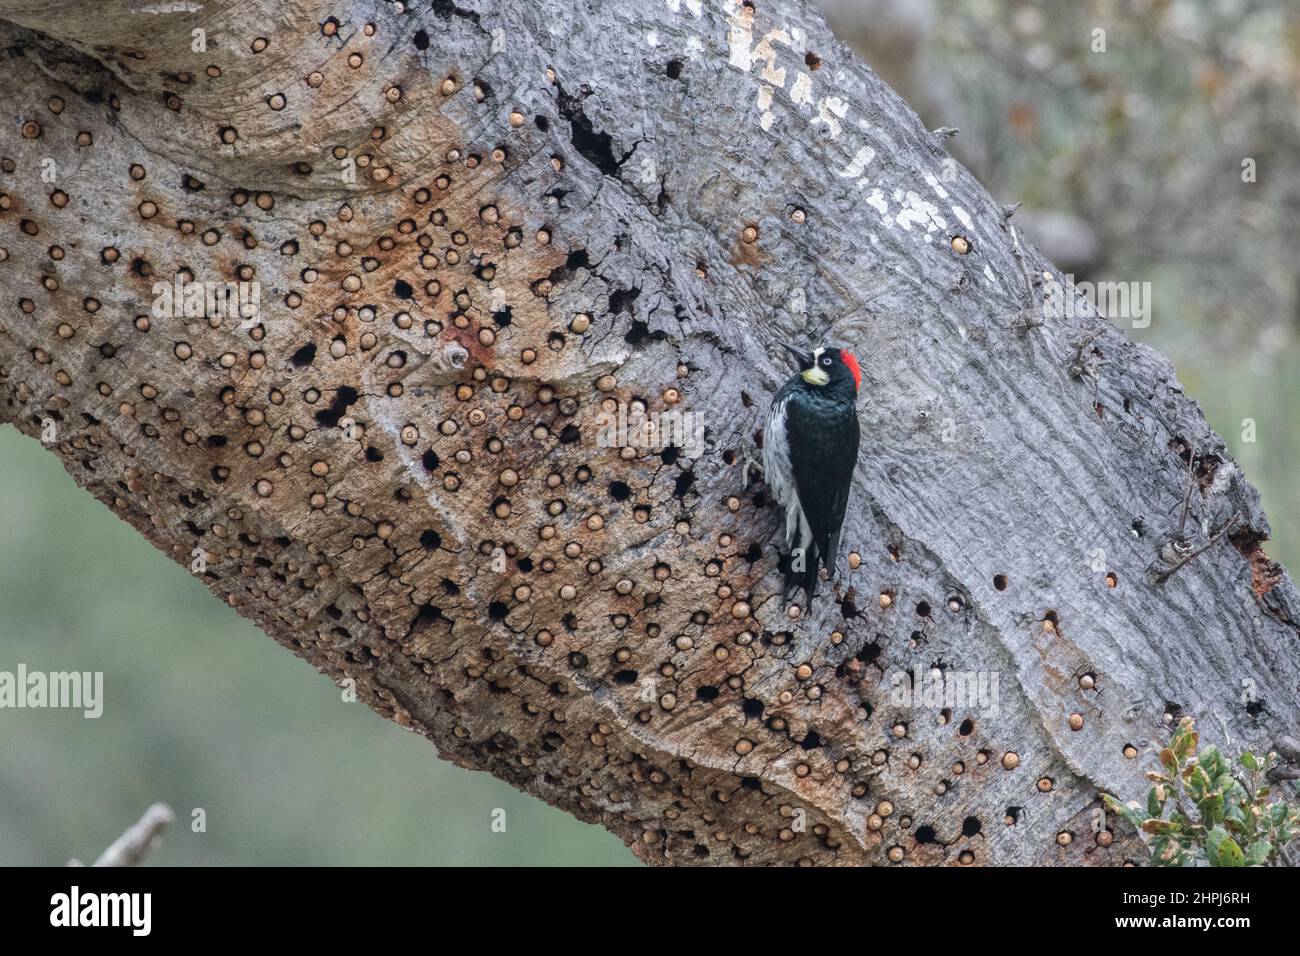 An Acorn Woodpecker (Melanerpes formicivorus) perched on its granary tree, an old oak where it stores acorns in holes in the bark. Stock Photo